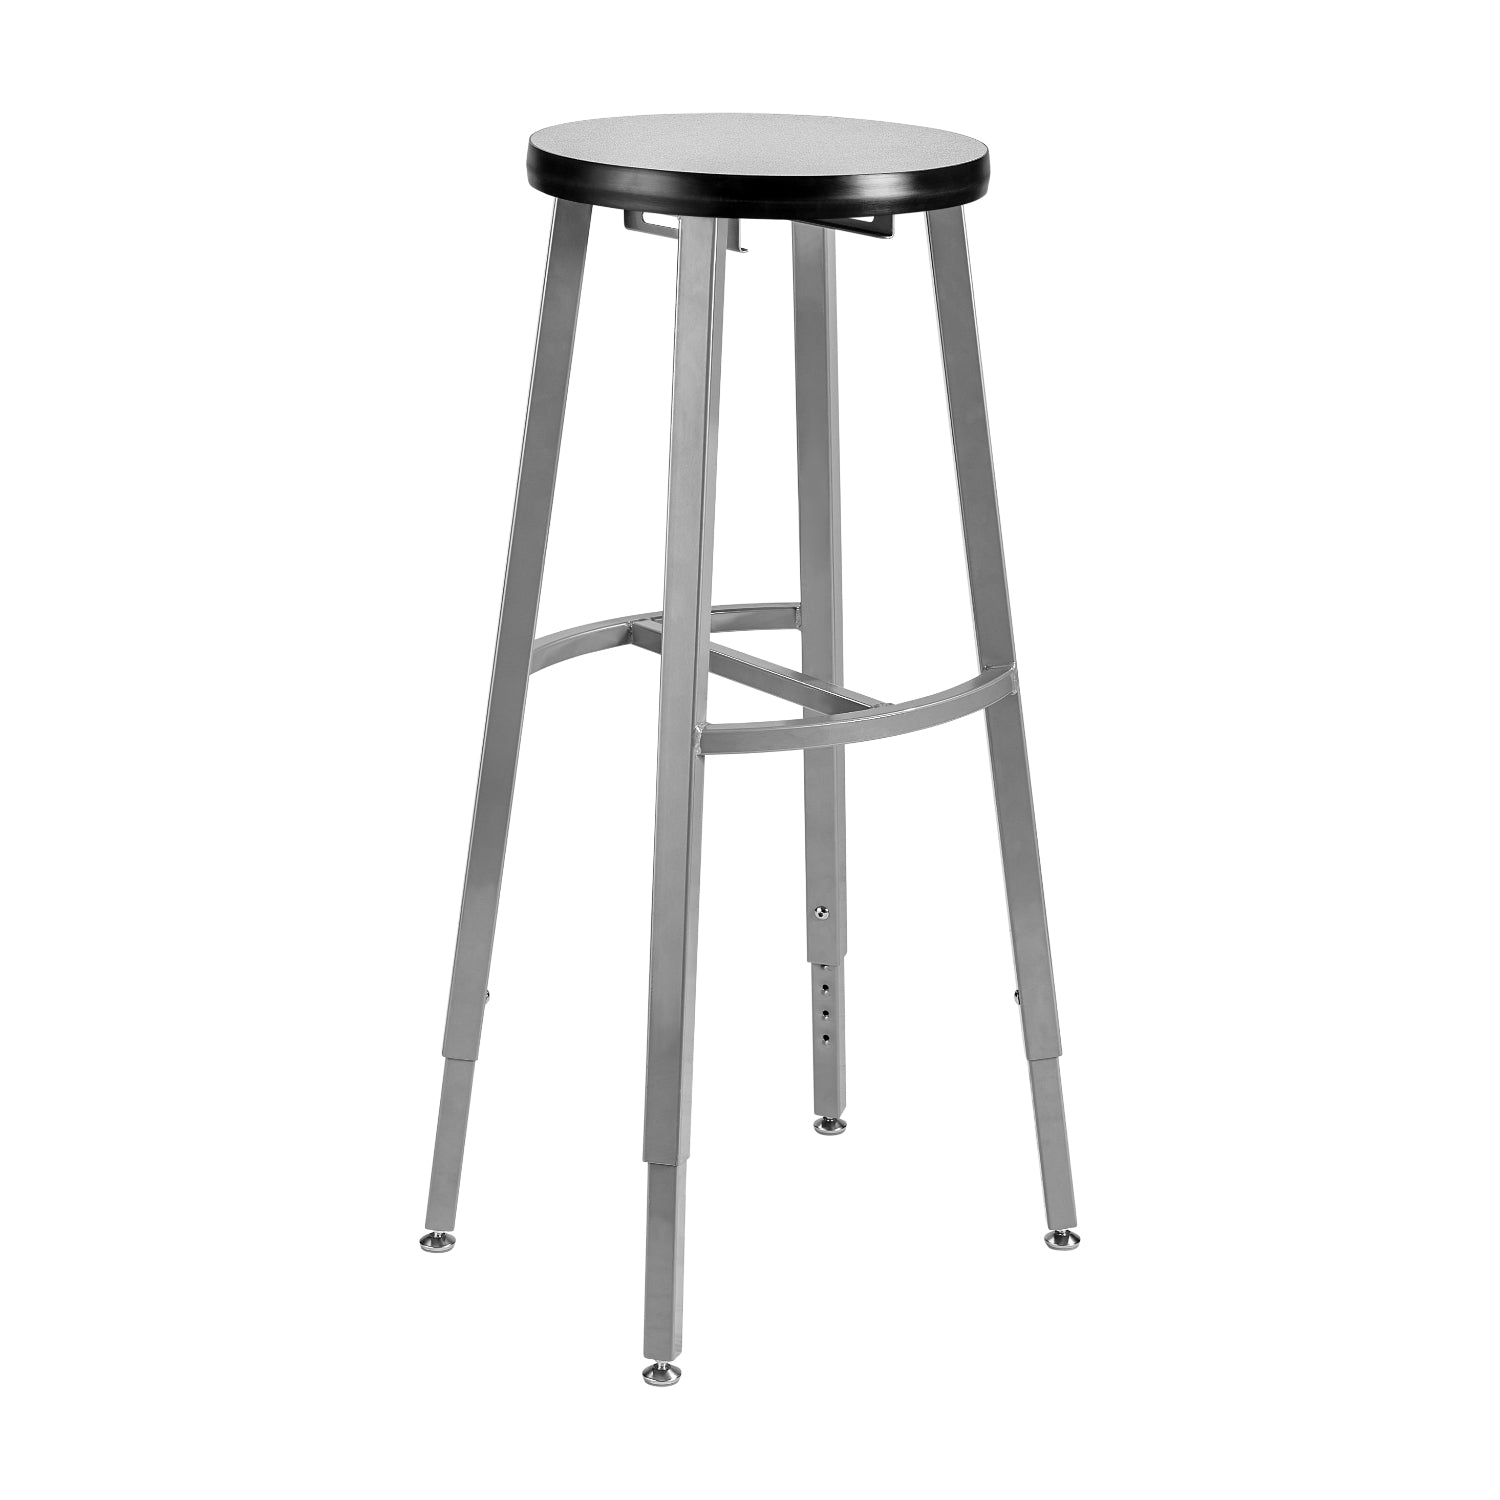 Titan Adjustable Height Stool, Laminate Seat with MDF Core/ProtectEdge, 30-38" Seat Height